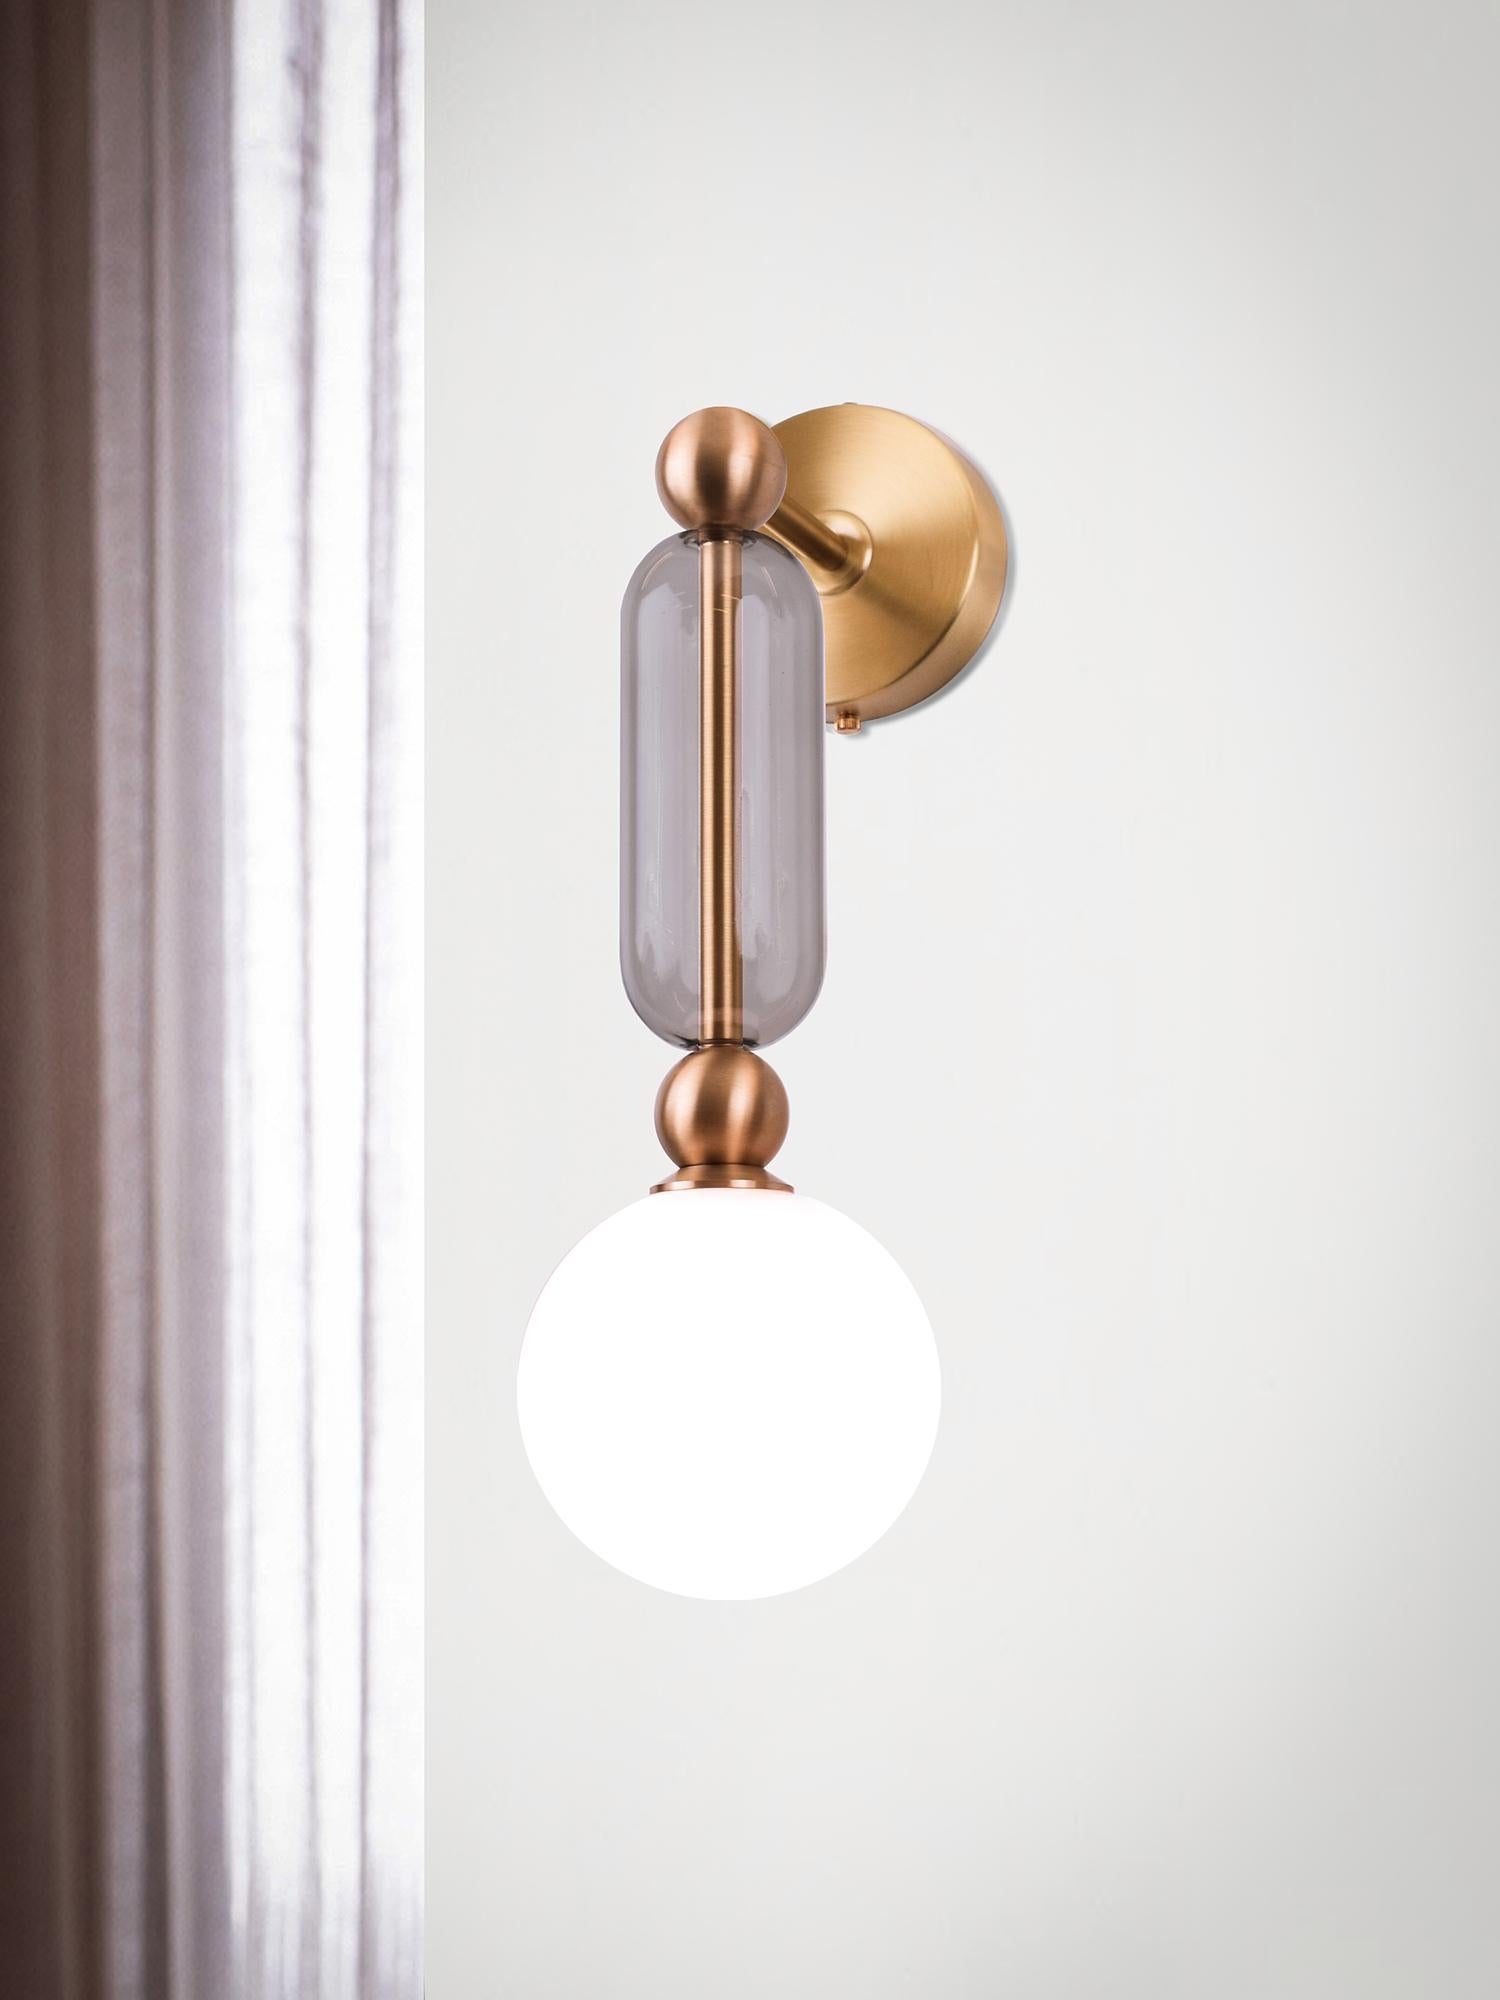 Case comprises of delicate brass arms encased in crystal glass tubes. All joined with solid brass sphere connectors to 
allow for multiple configurations and size options.